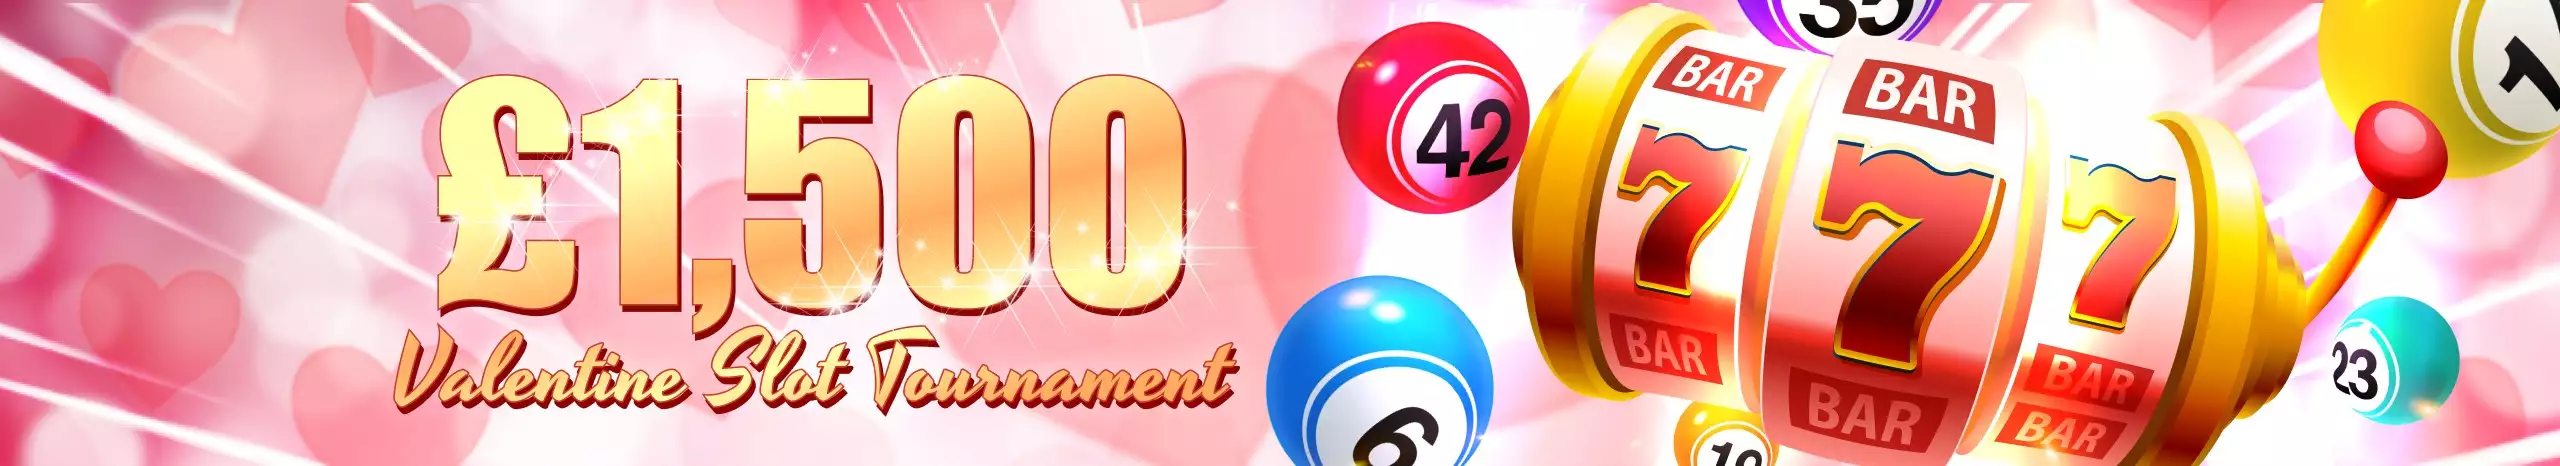 Bingo promotions Info at UK-Bingo.net. Check a list of weekly & monthly promotions plus Special Bingo Games.